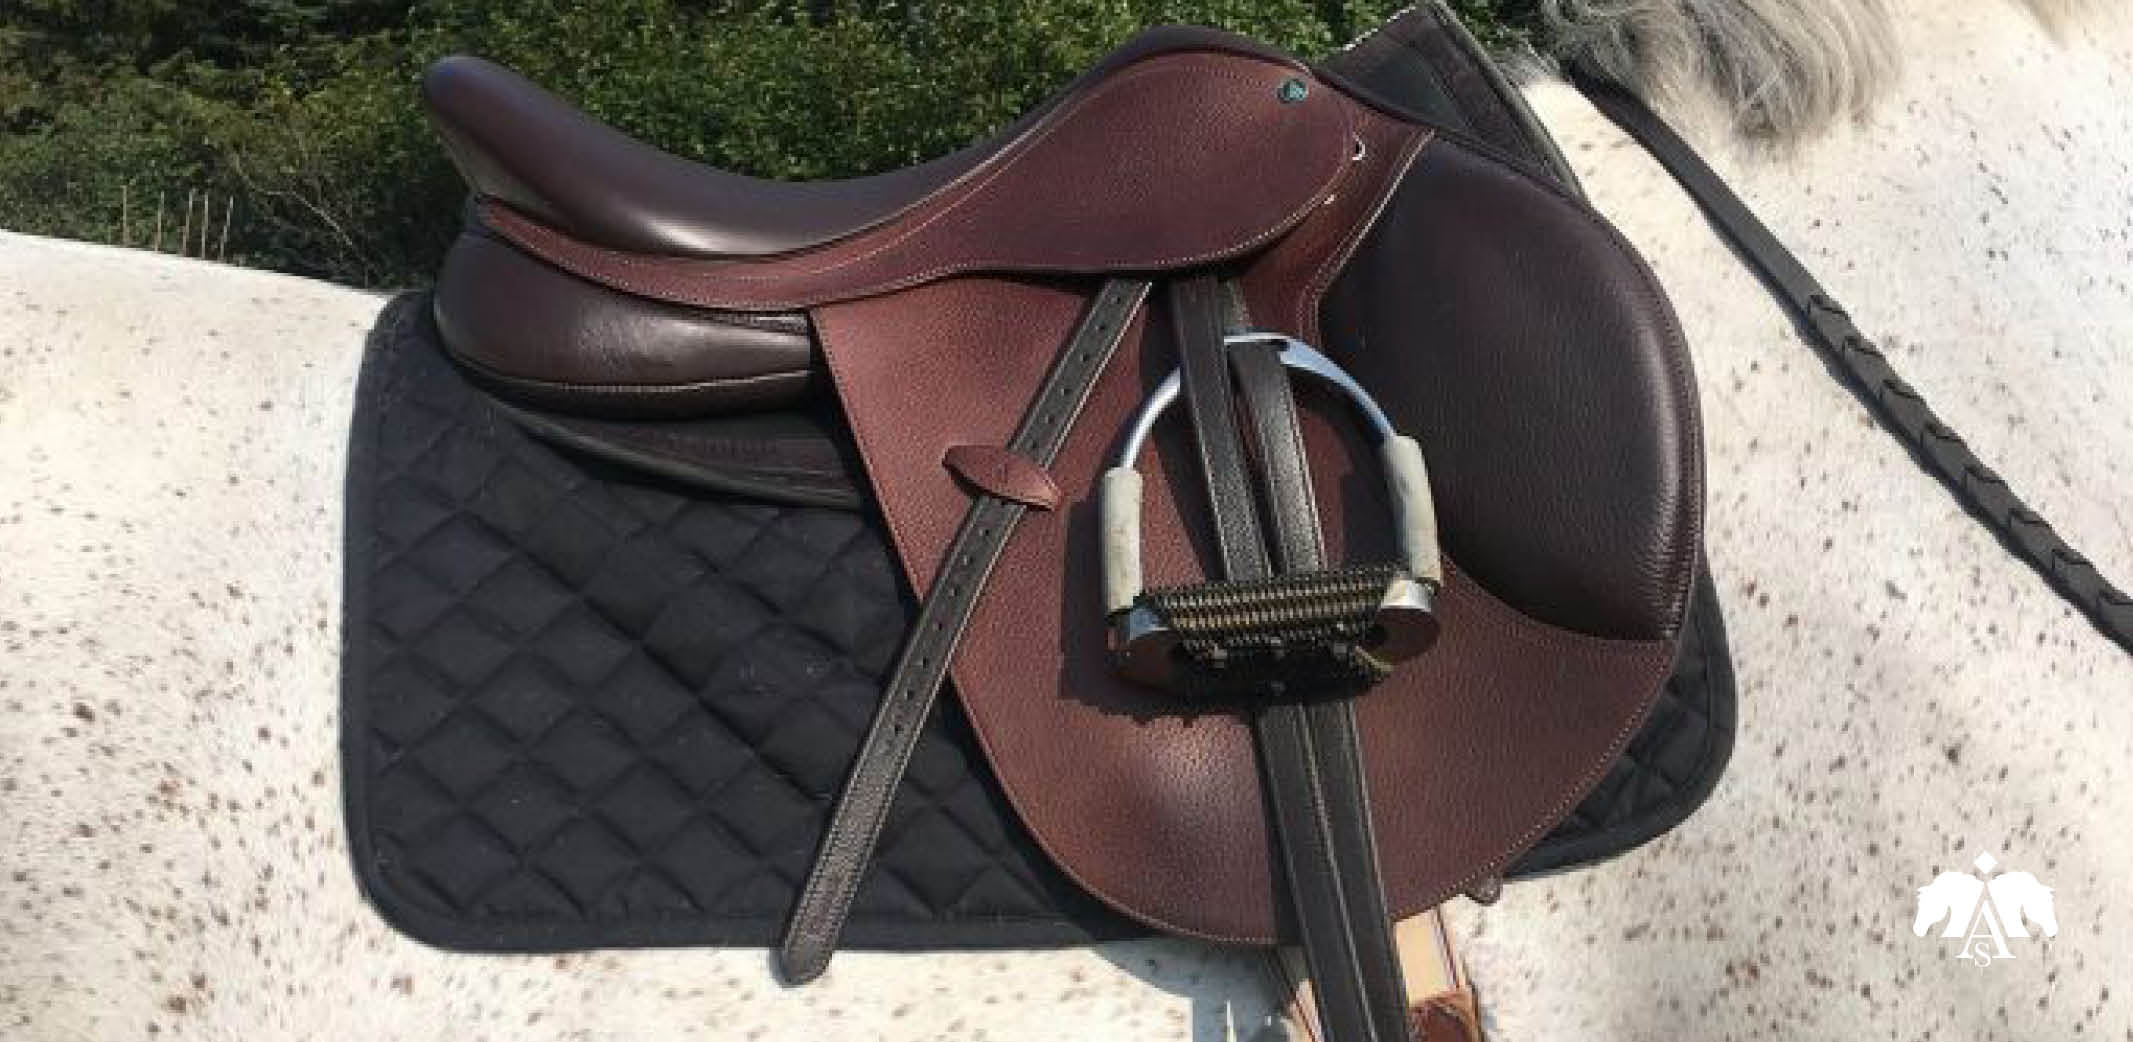 Product review: Arena Saddles - Exceptional Quality on an Acceptable Budget